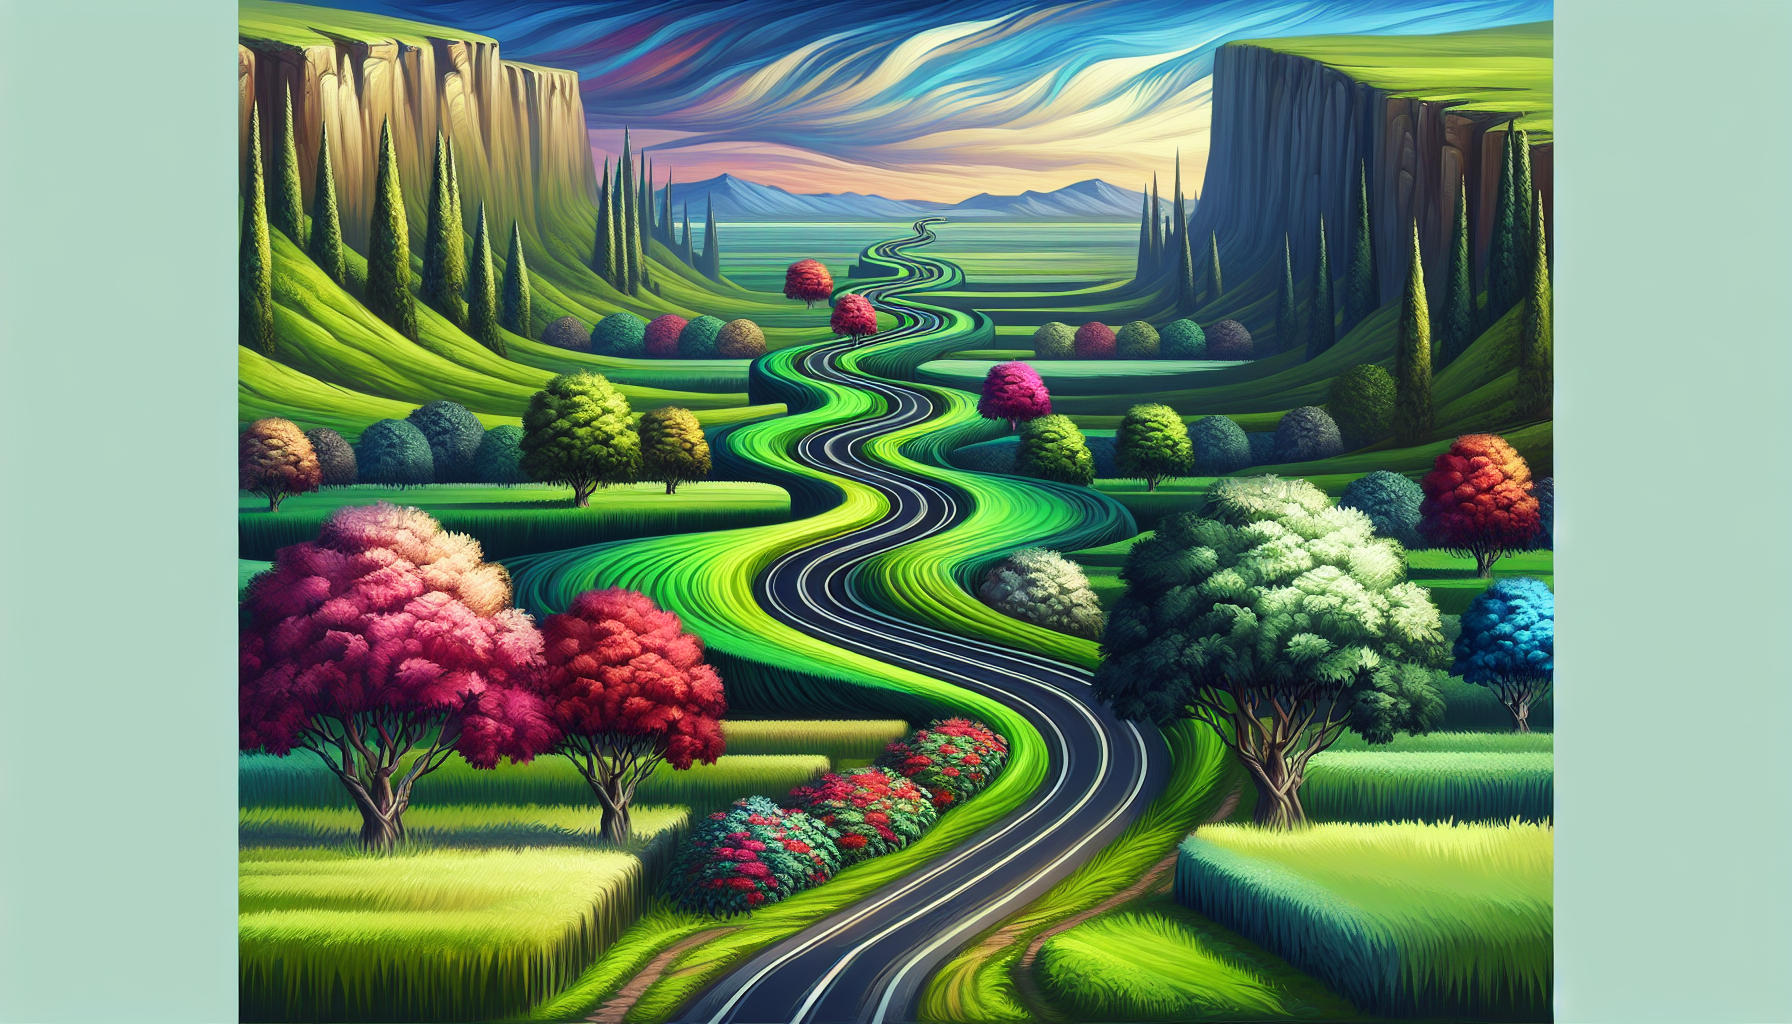 An artistic representation of a winding, picturesque road leading to a cliff, illustrating the verse from Proverbs 16:25, 'There is a way that seems right to a man, but its end is the way to death.'